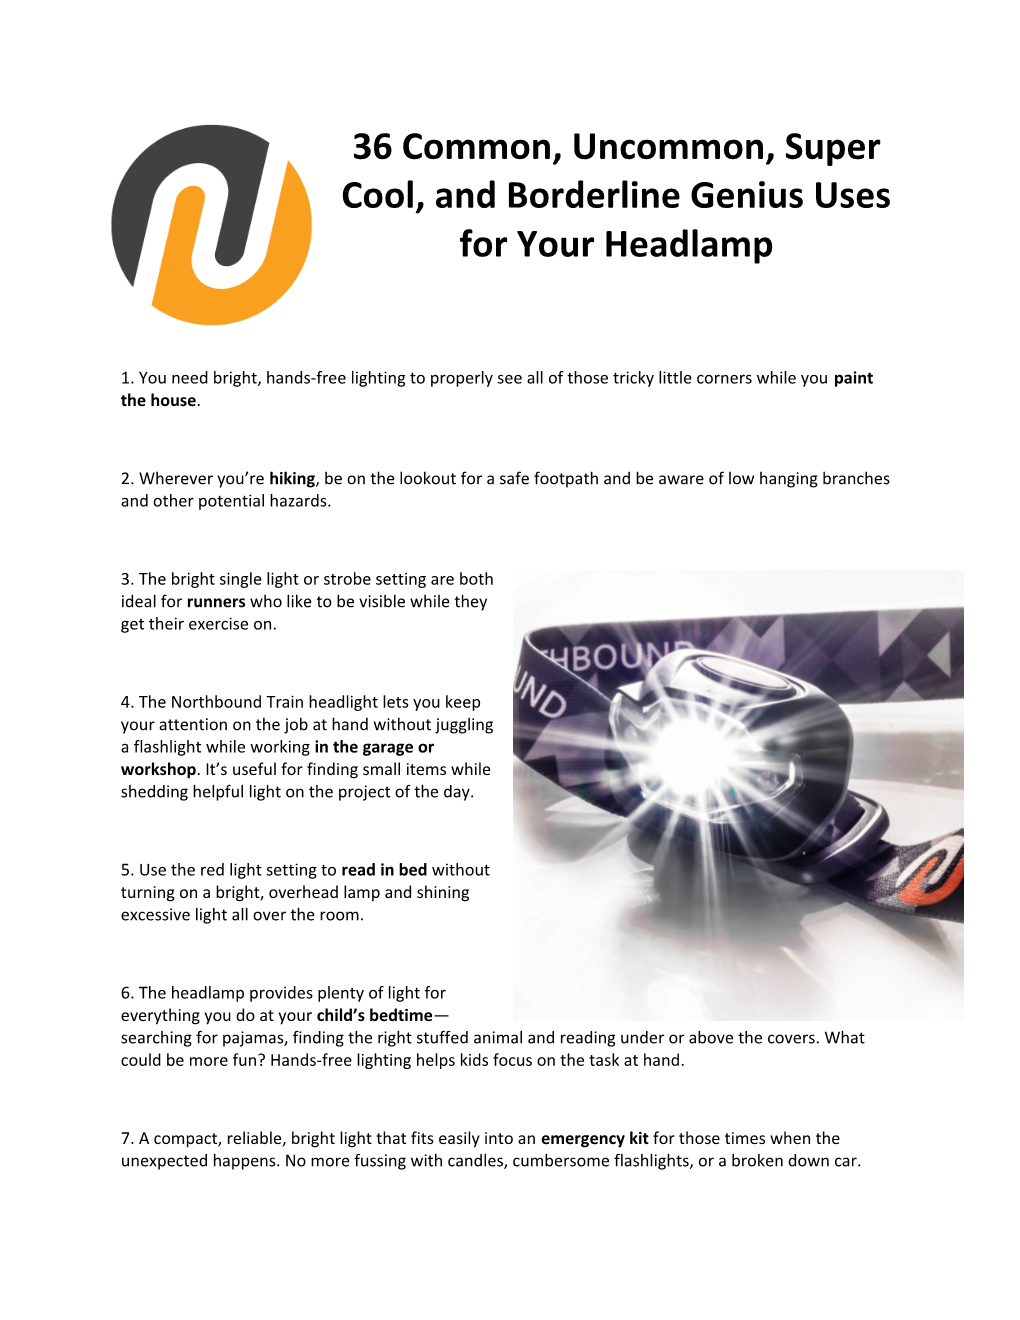 36 Common, Uncommon, Supercool, and Borderline Genius Uses for Your Headlamp